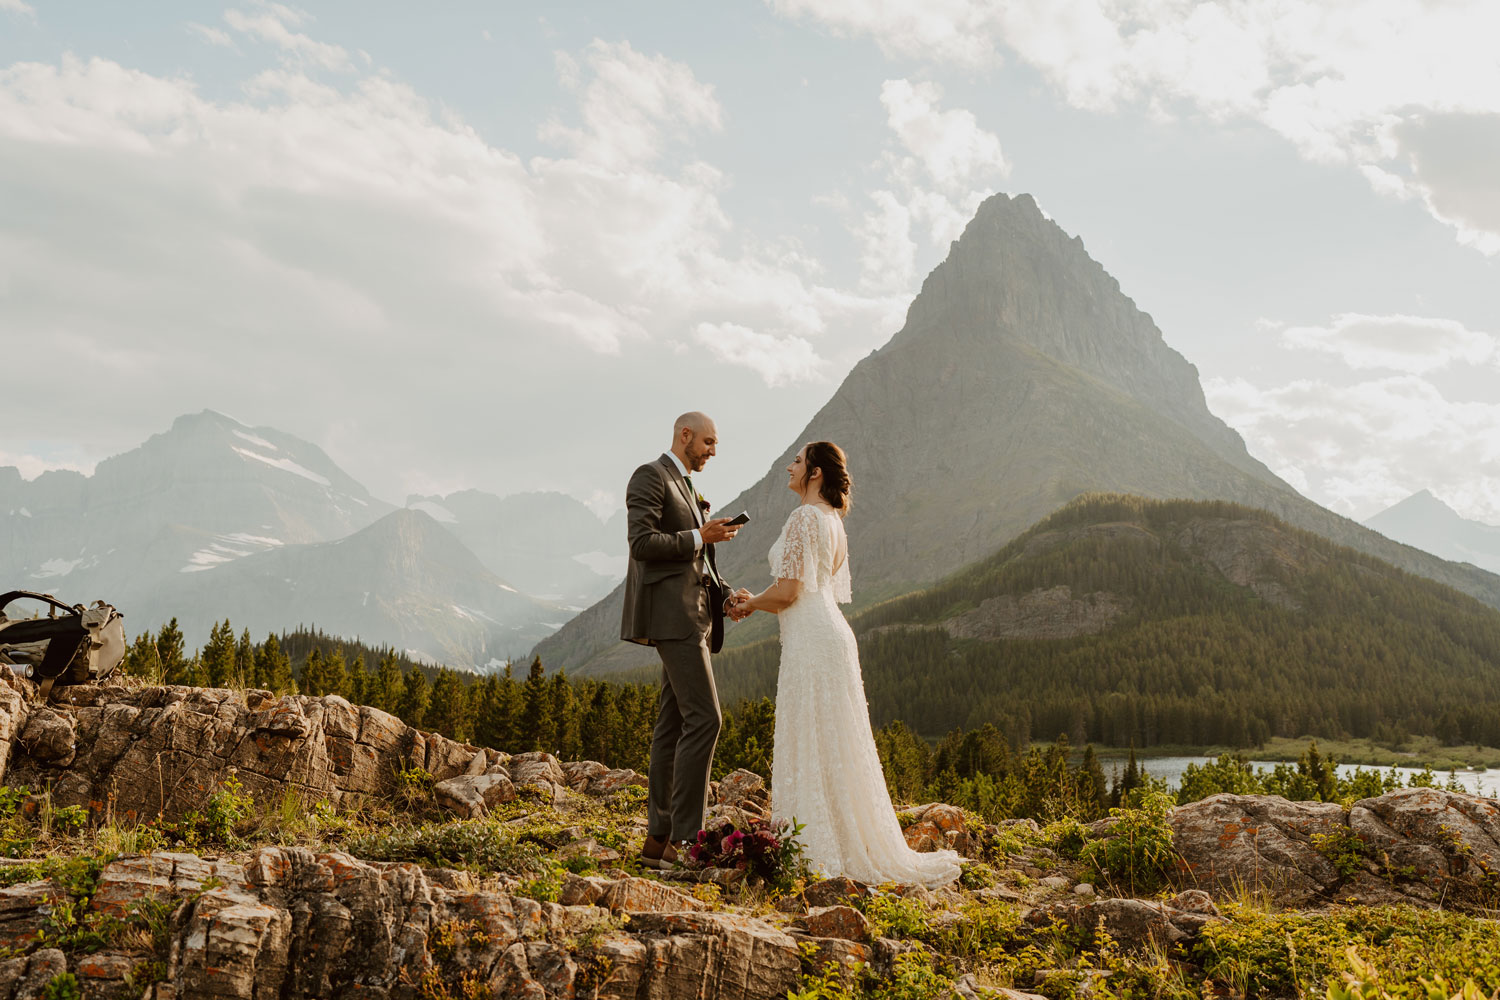 Couple exchanging vows during their Glacier National Park elopement standing on rocky terrain with a mountainscape behind them and a cloudy sky.